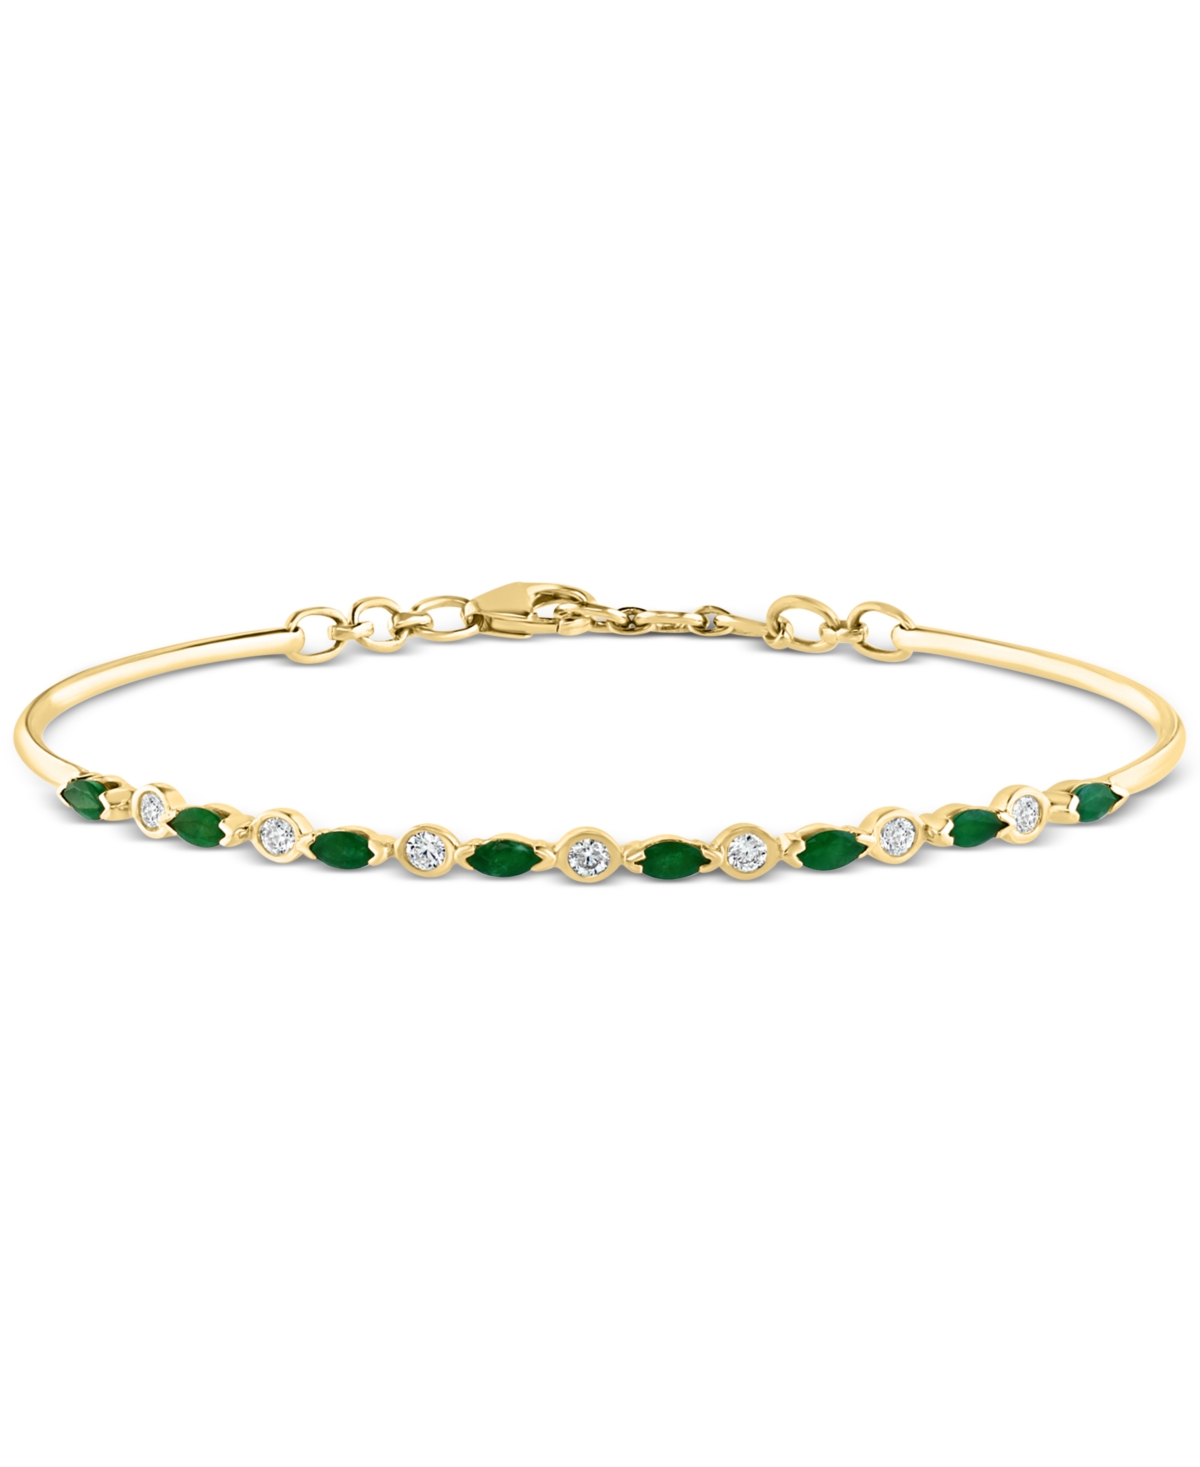 Sapphire (3/4 ct. t.w.) & Diamond (1/5 ct. t.w.) Tennis Bracelet in 14k White Gold (Also in Ruby and Emerald) - Emerald